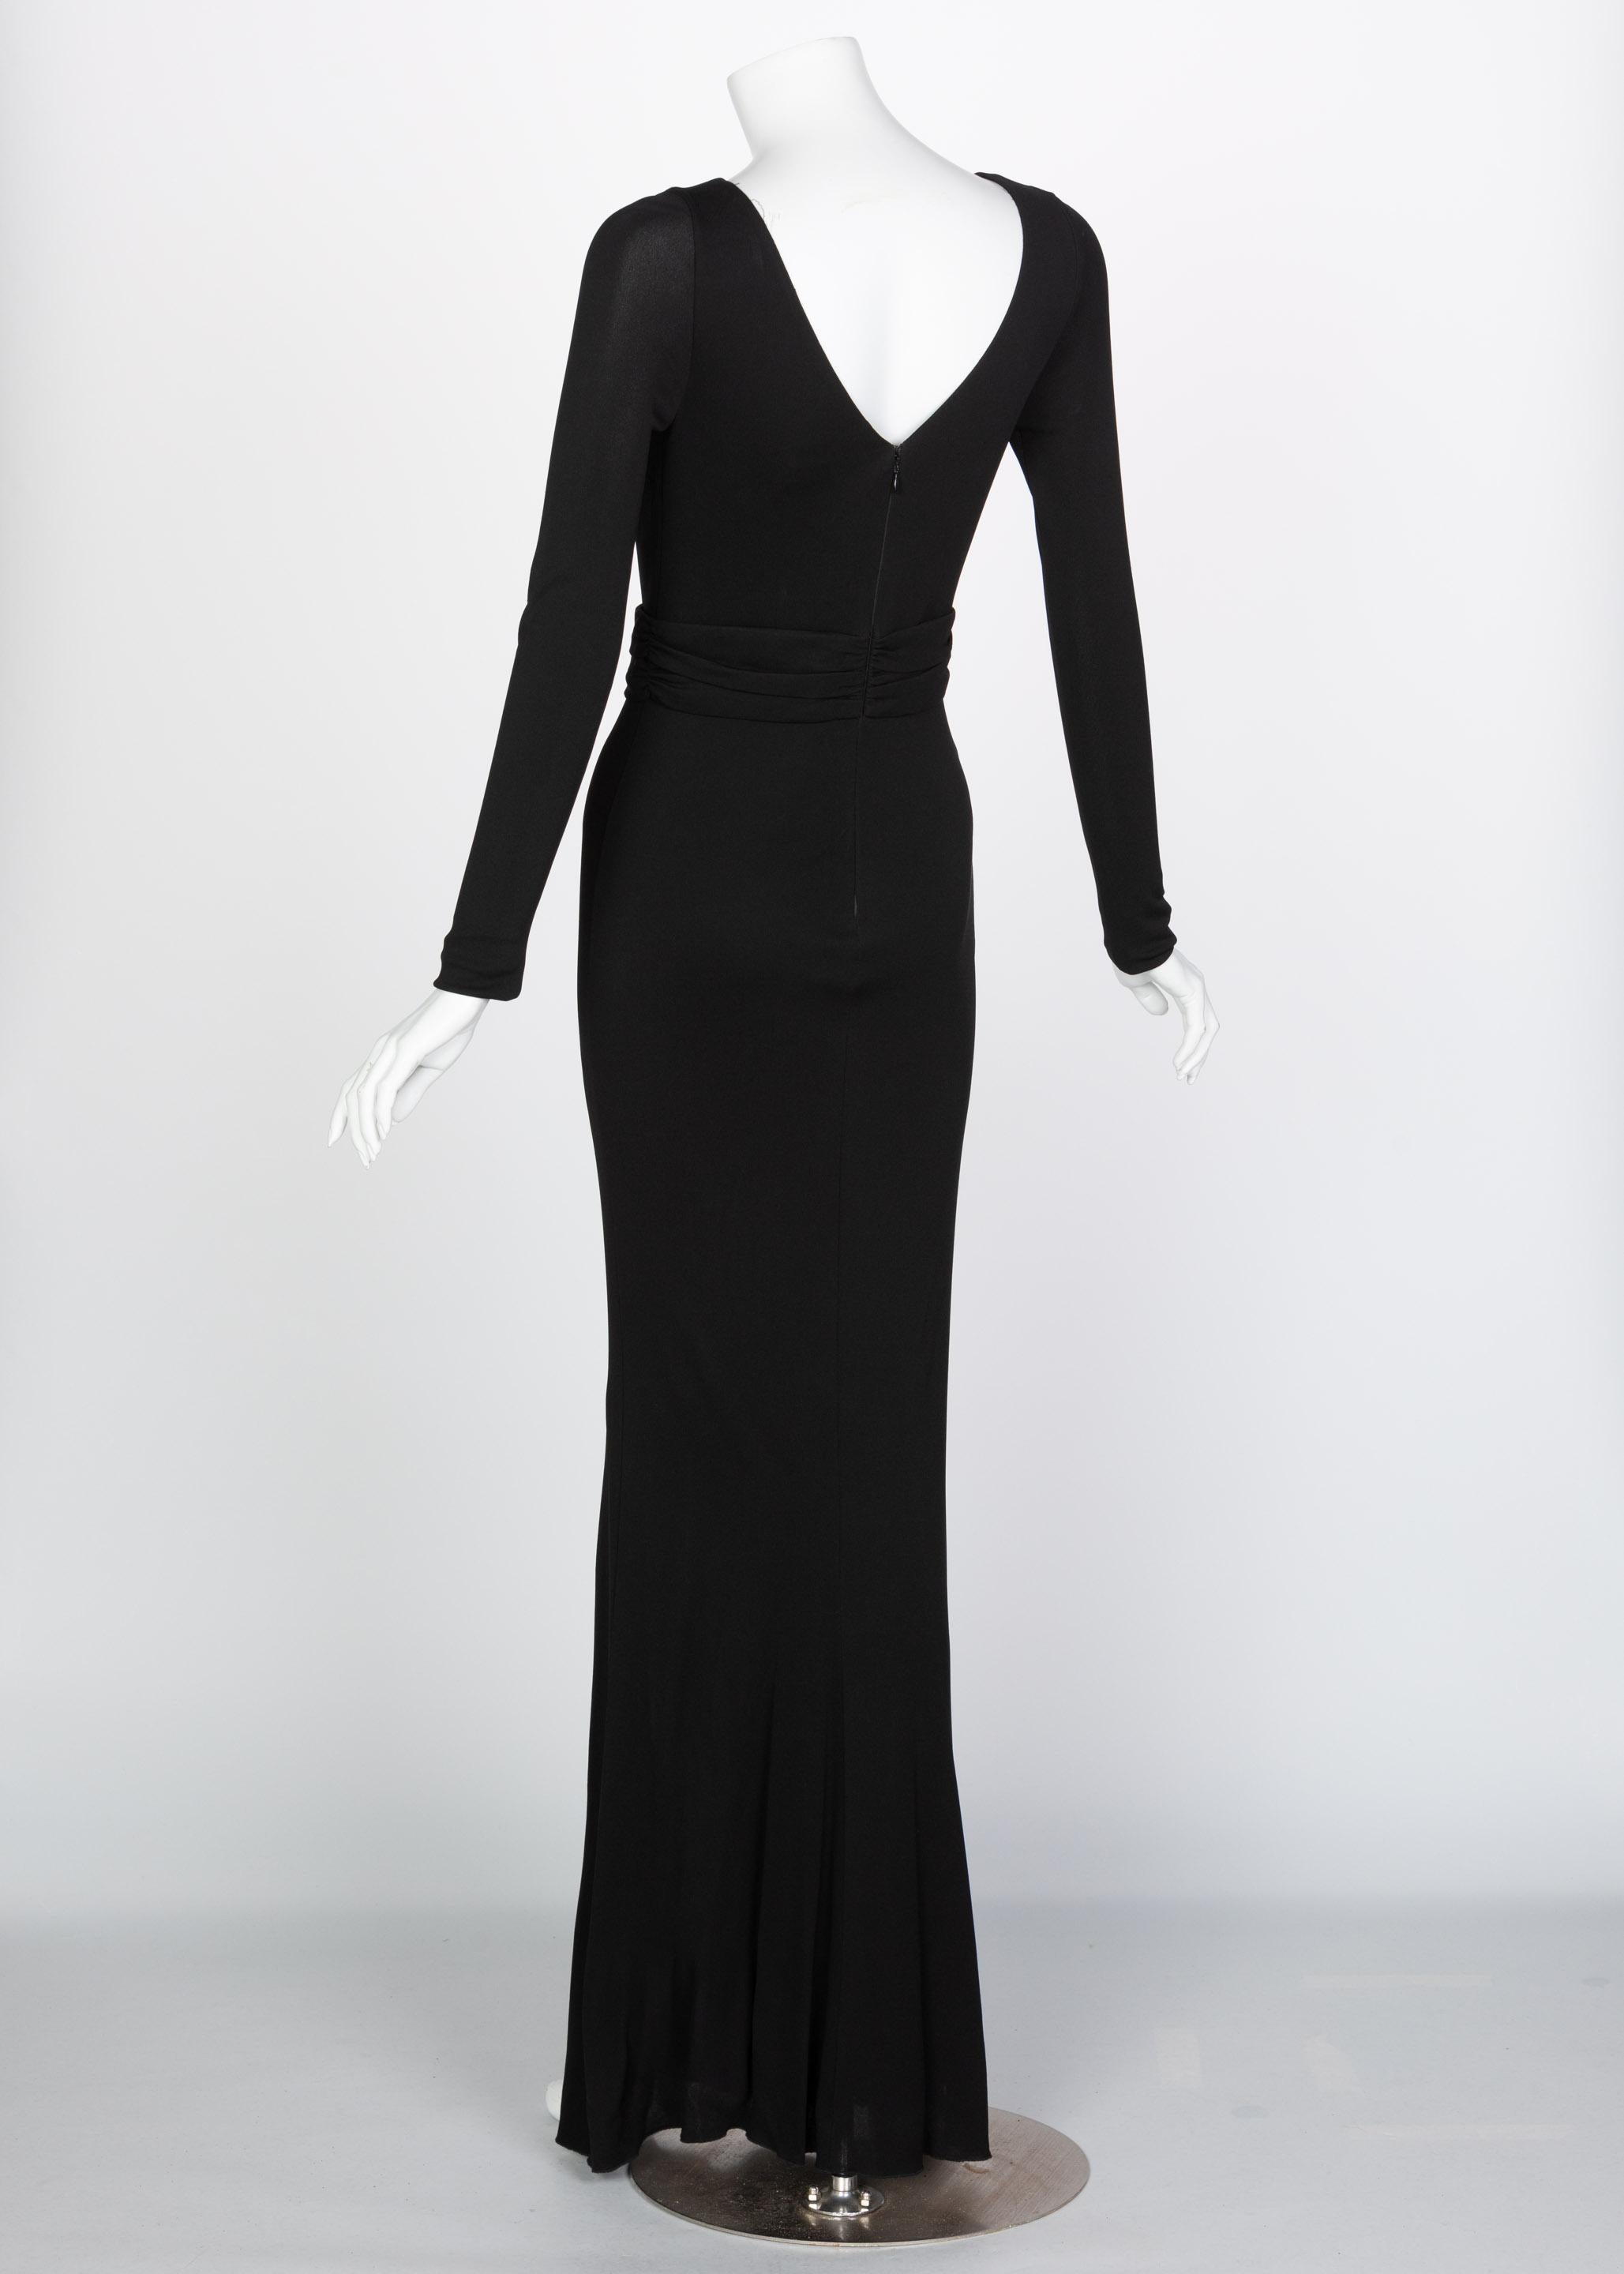 Emilio Pucci Black Liquid Jersey Cut Out Gold Maxi Dress Gown In Excellent Condition In Boca Raton, FL